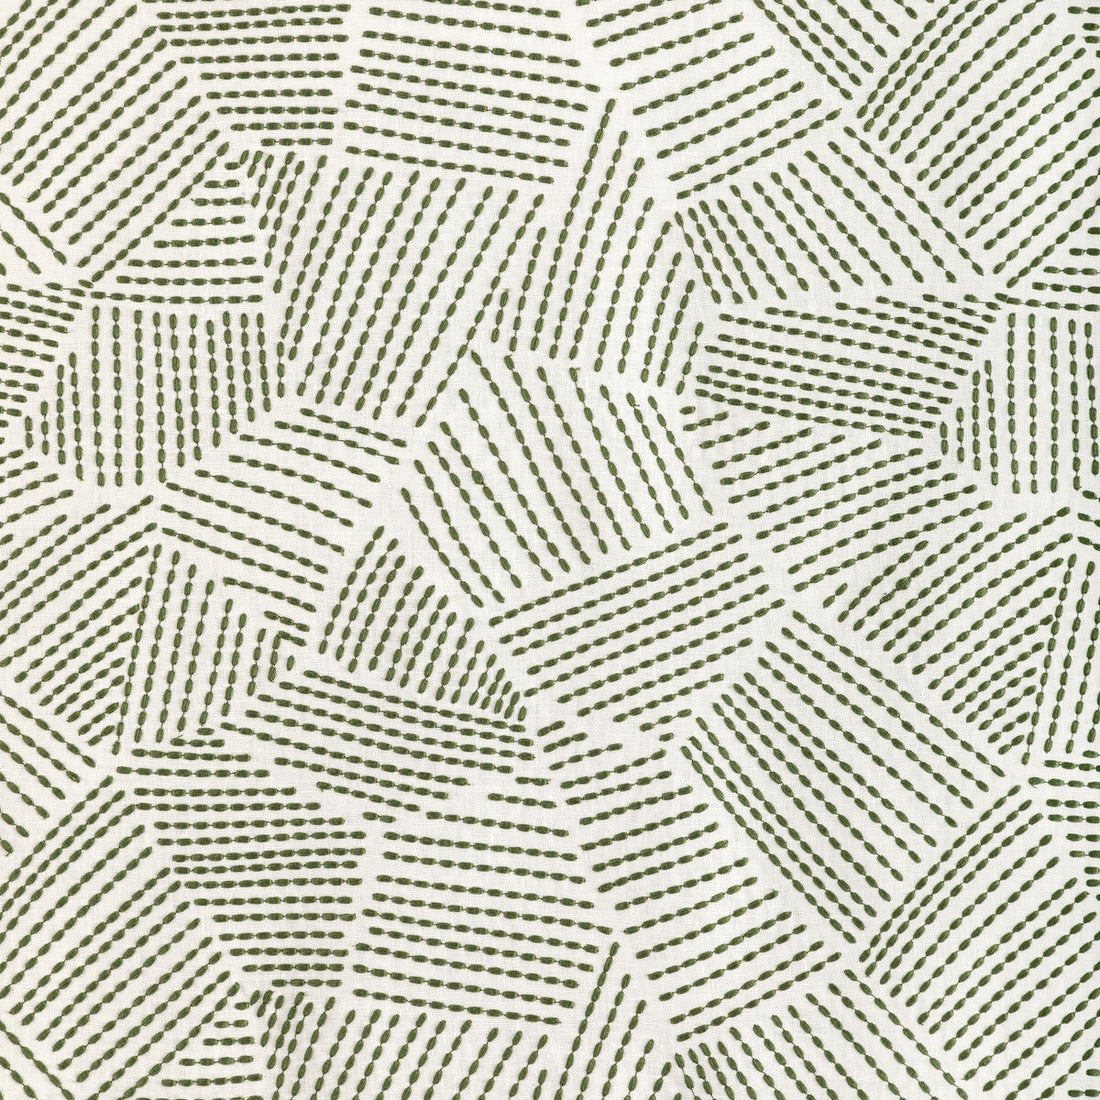 Chord Embroidery fabric in leaf color - pattern GWF-3776.3.0 - by Lee Jofa Modern in the Rhapsody collection